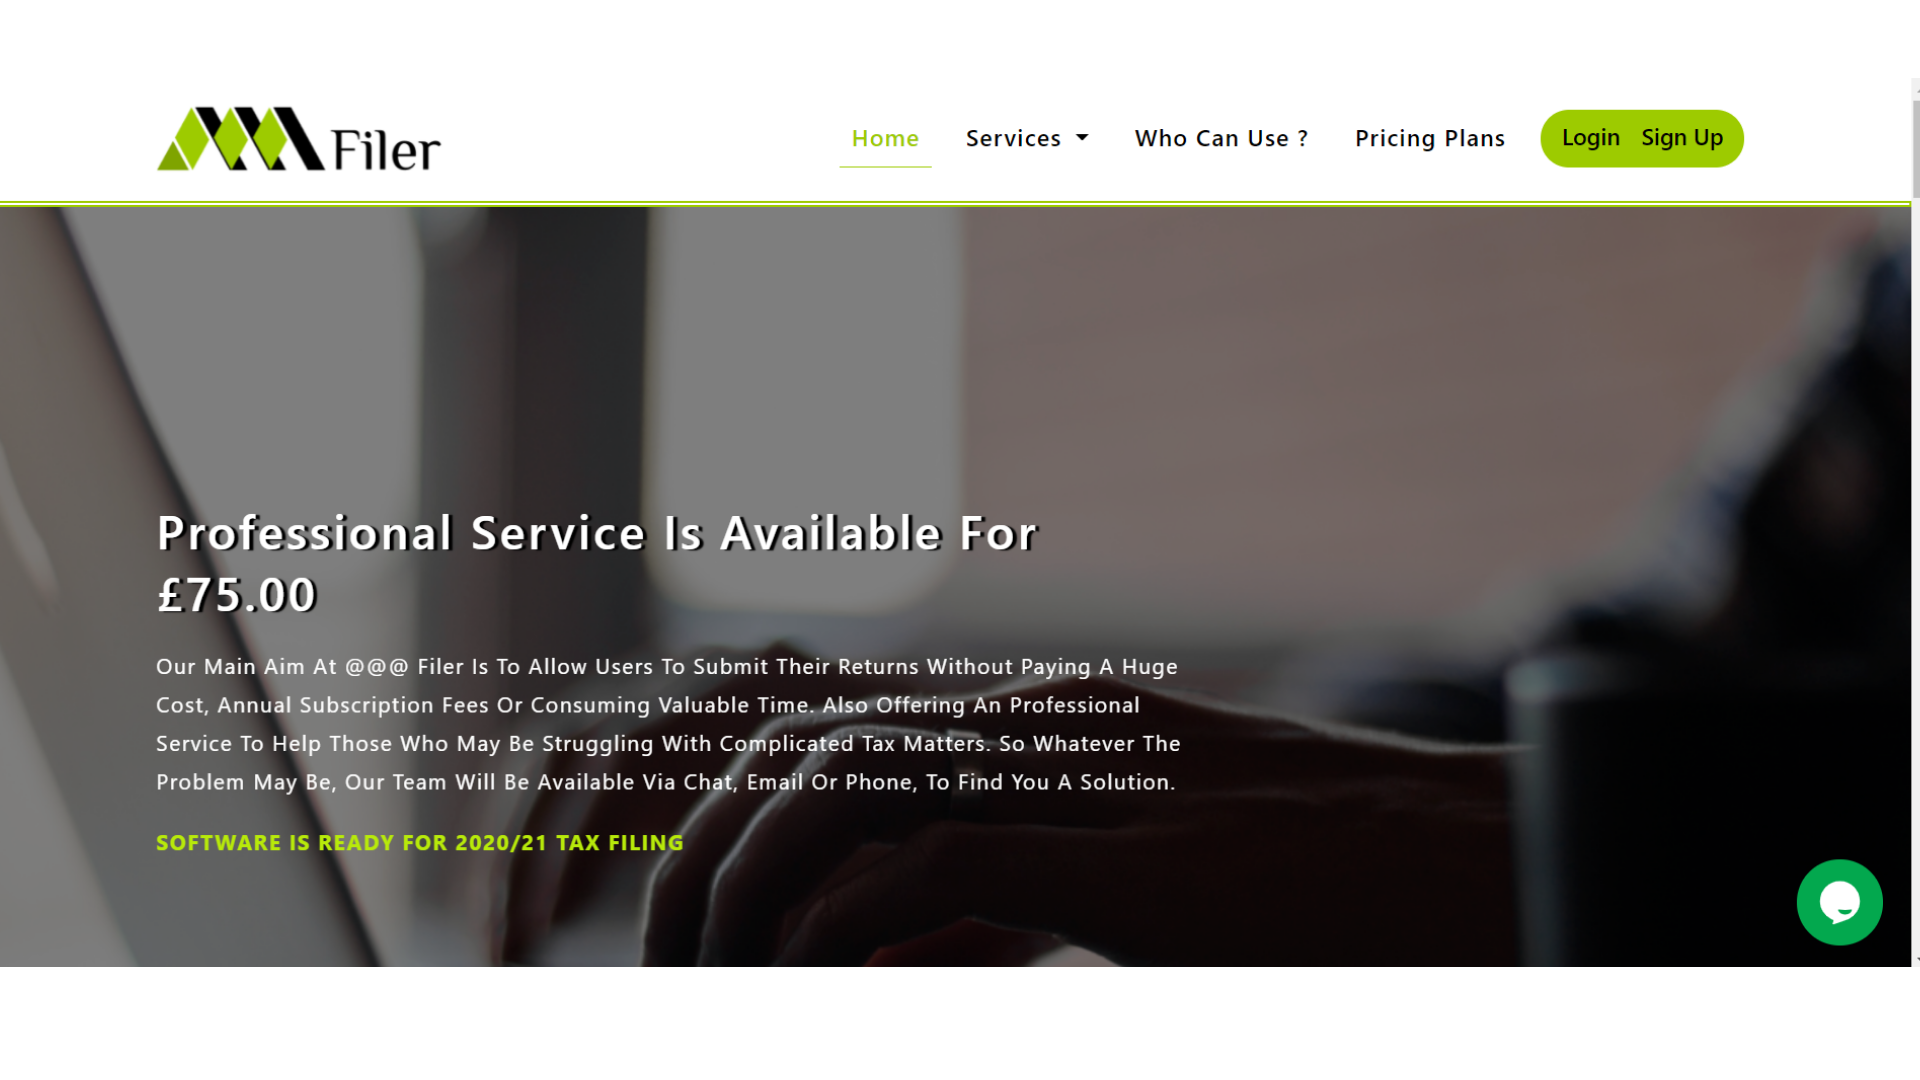 Online Tax Advice Service in Manchester, London - Aaa Filer